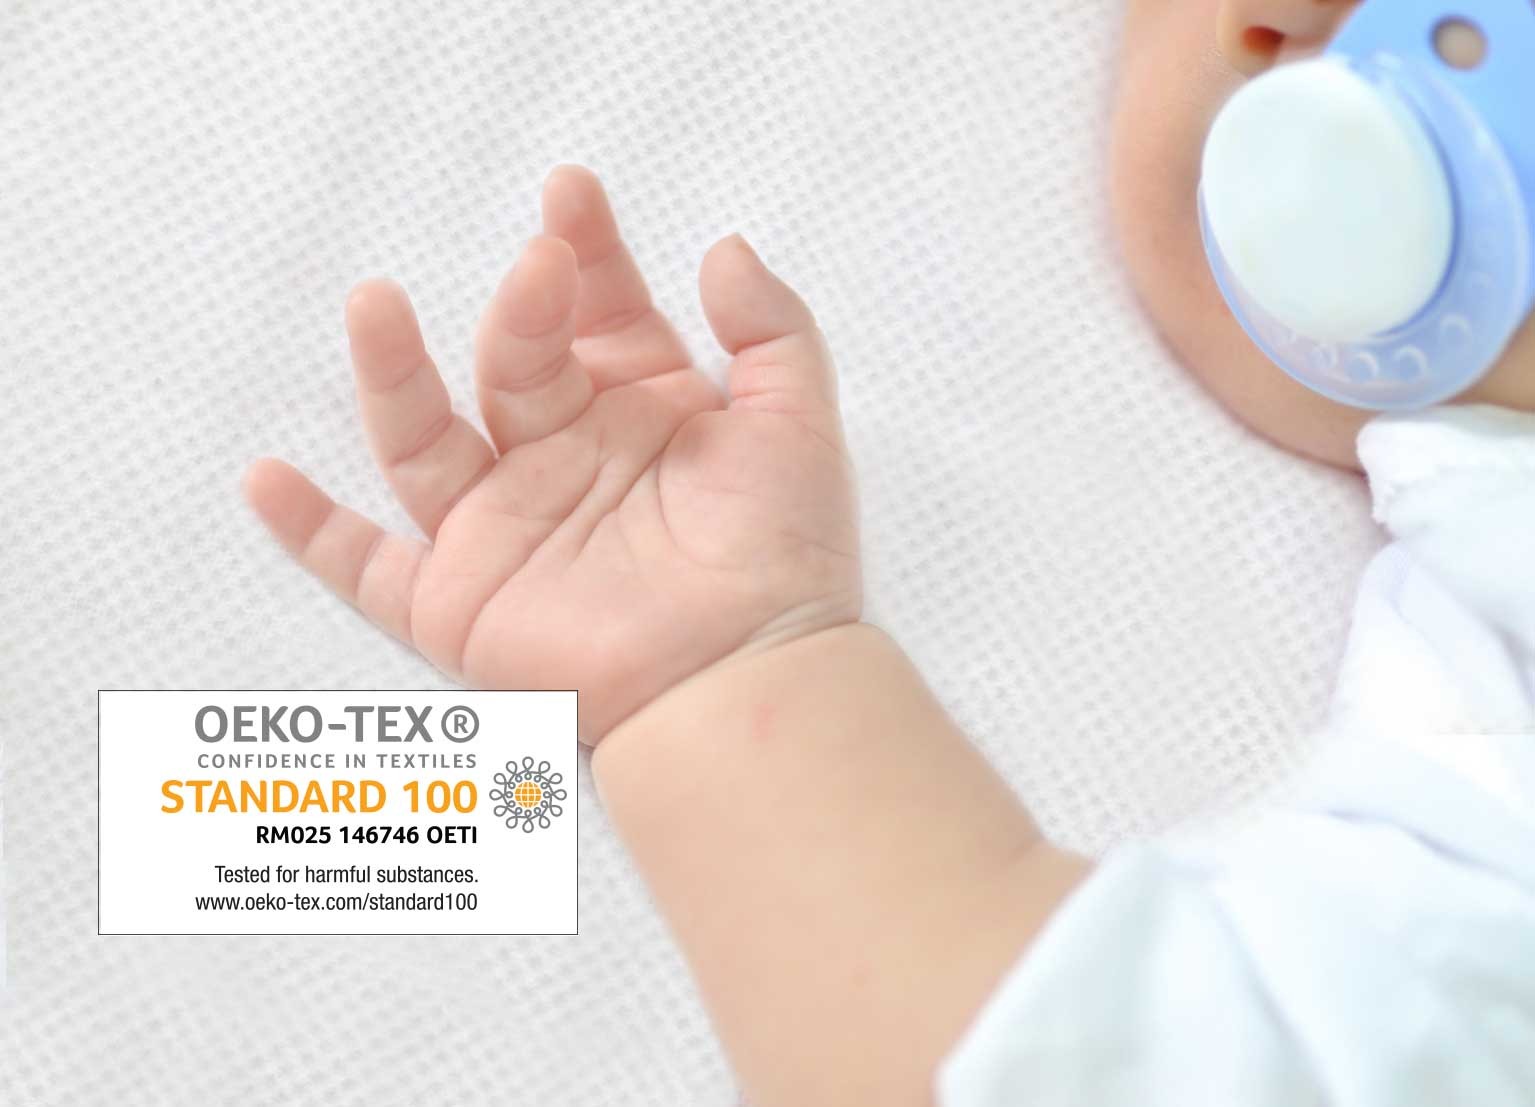 What is OEKO-TEX Standard 100 and what does it mean for my